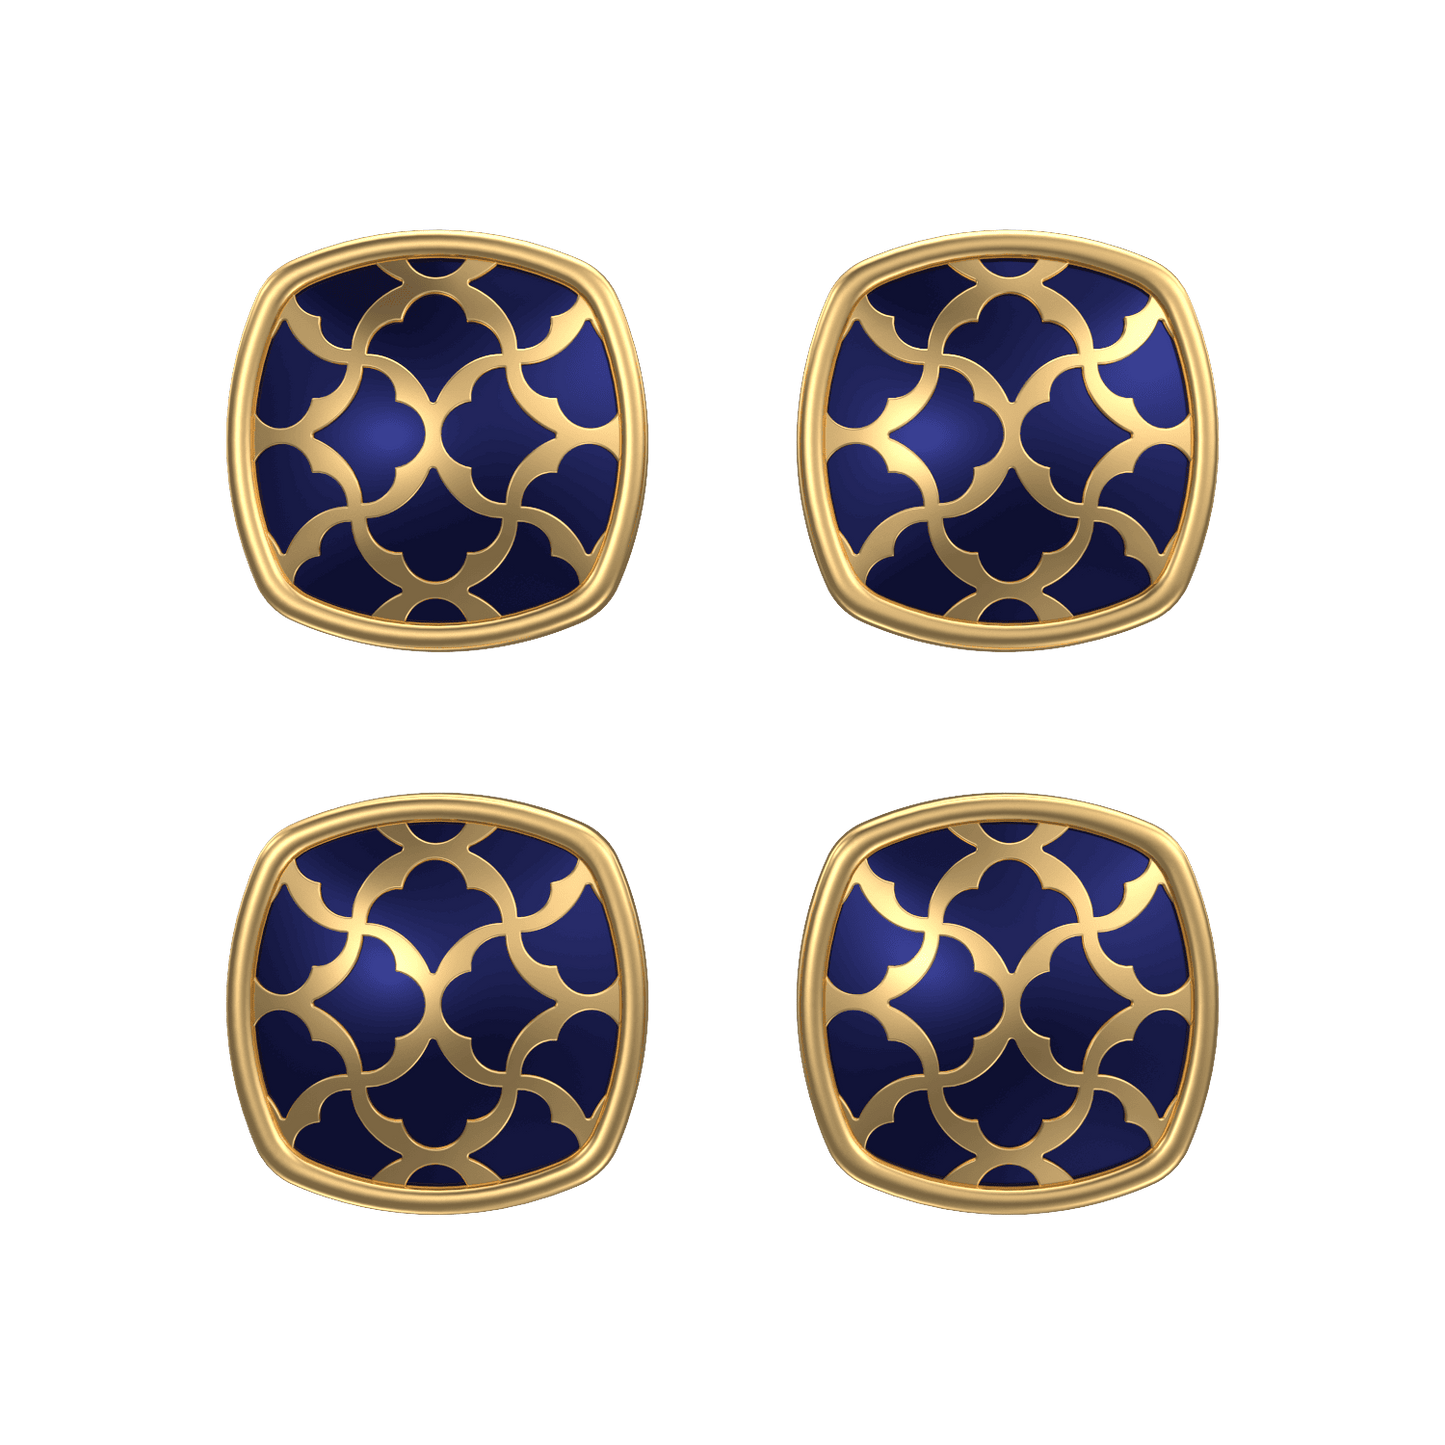 Enchanted, Classic Kurta Button Set with 18kt Gold Plating and Enamel